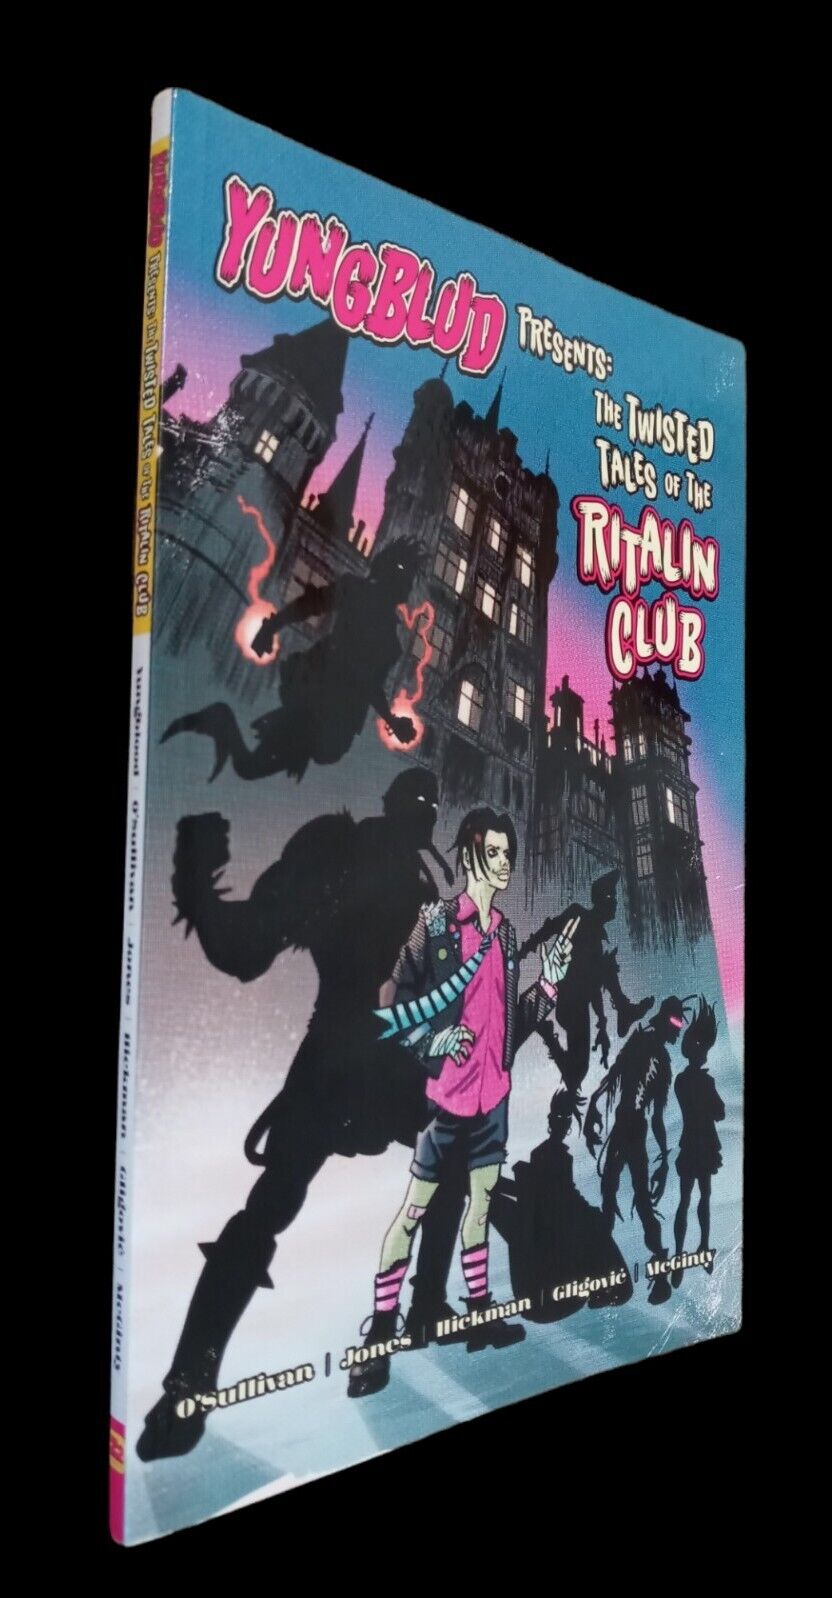 Yungblud Presents Twisted Tales of the Ritalin Club Book O Sullivan Graphic Nove